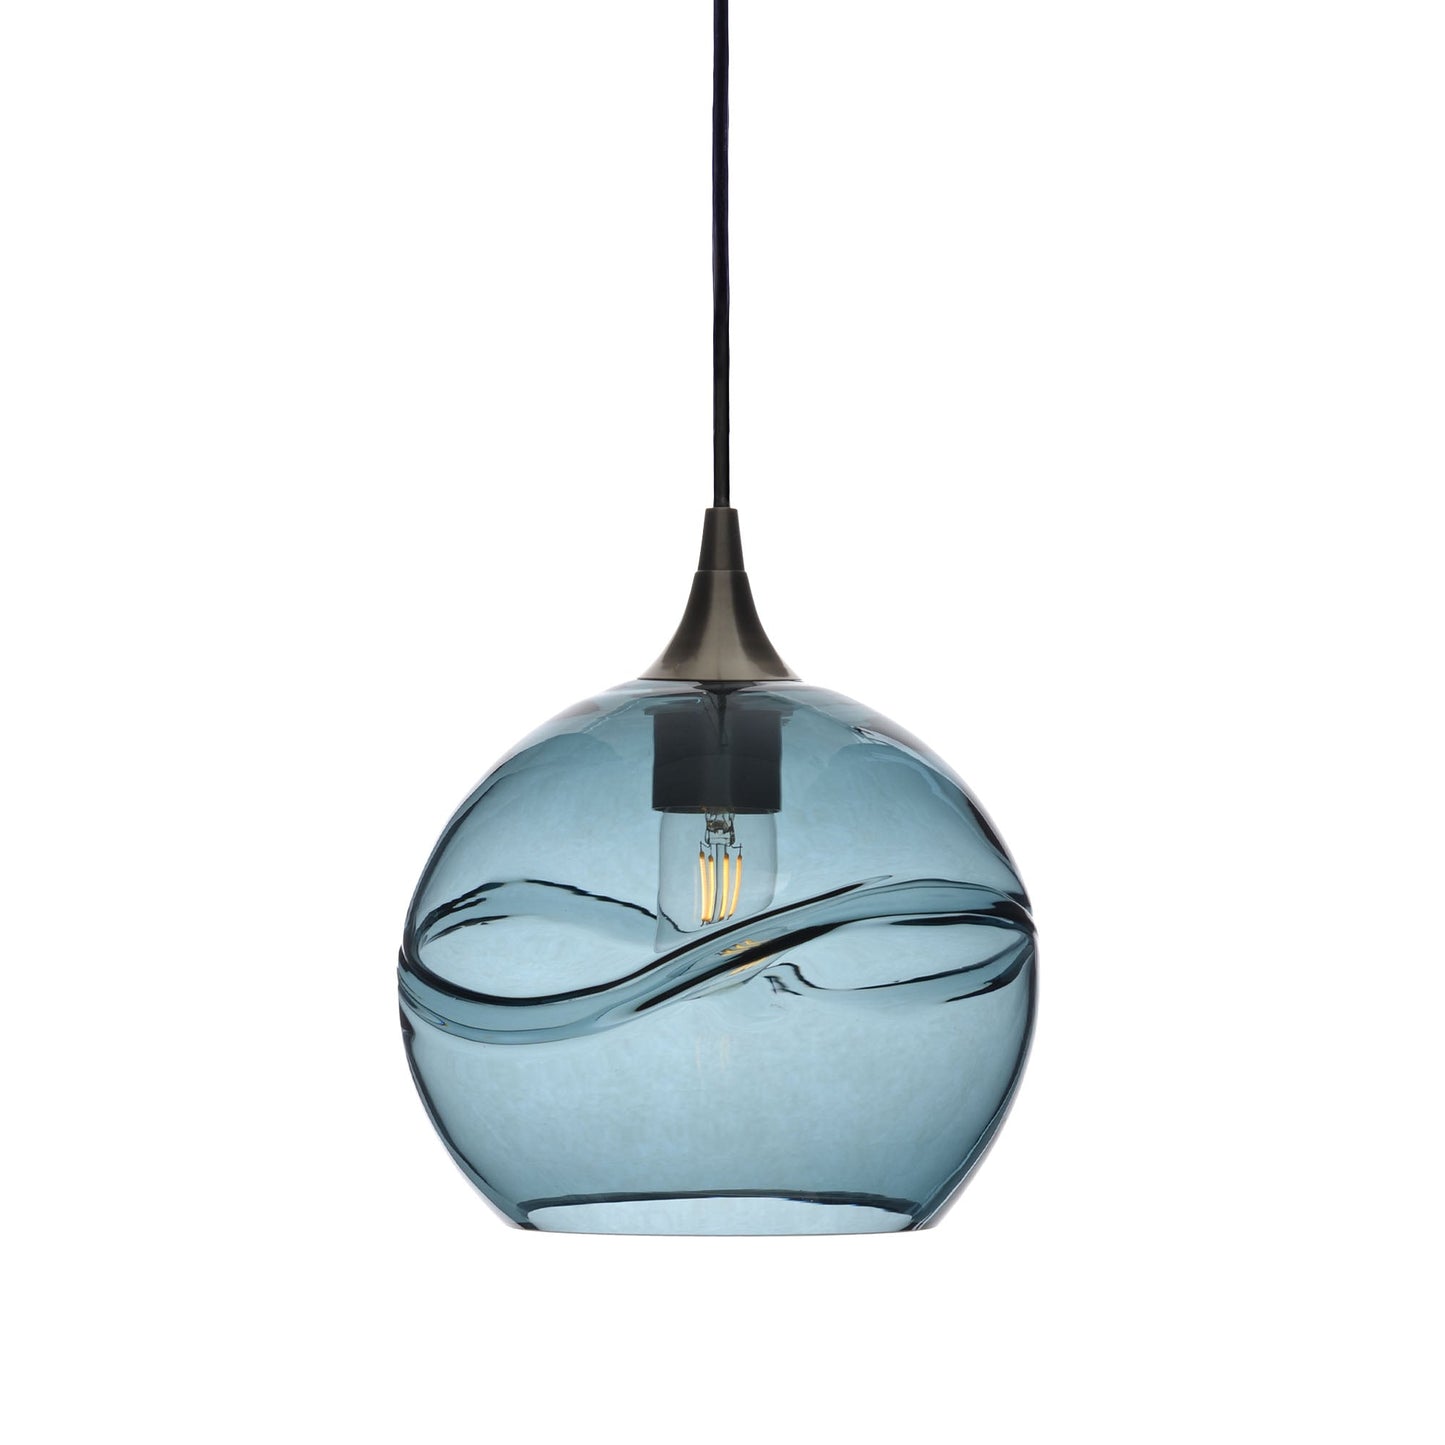 768 Swell: Single Pendant Light-Glass-Bicycle Glass Co - Hotshop-Slate Gray-Antique Bronze-Bicycle Glass Co